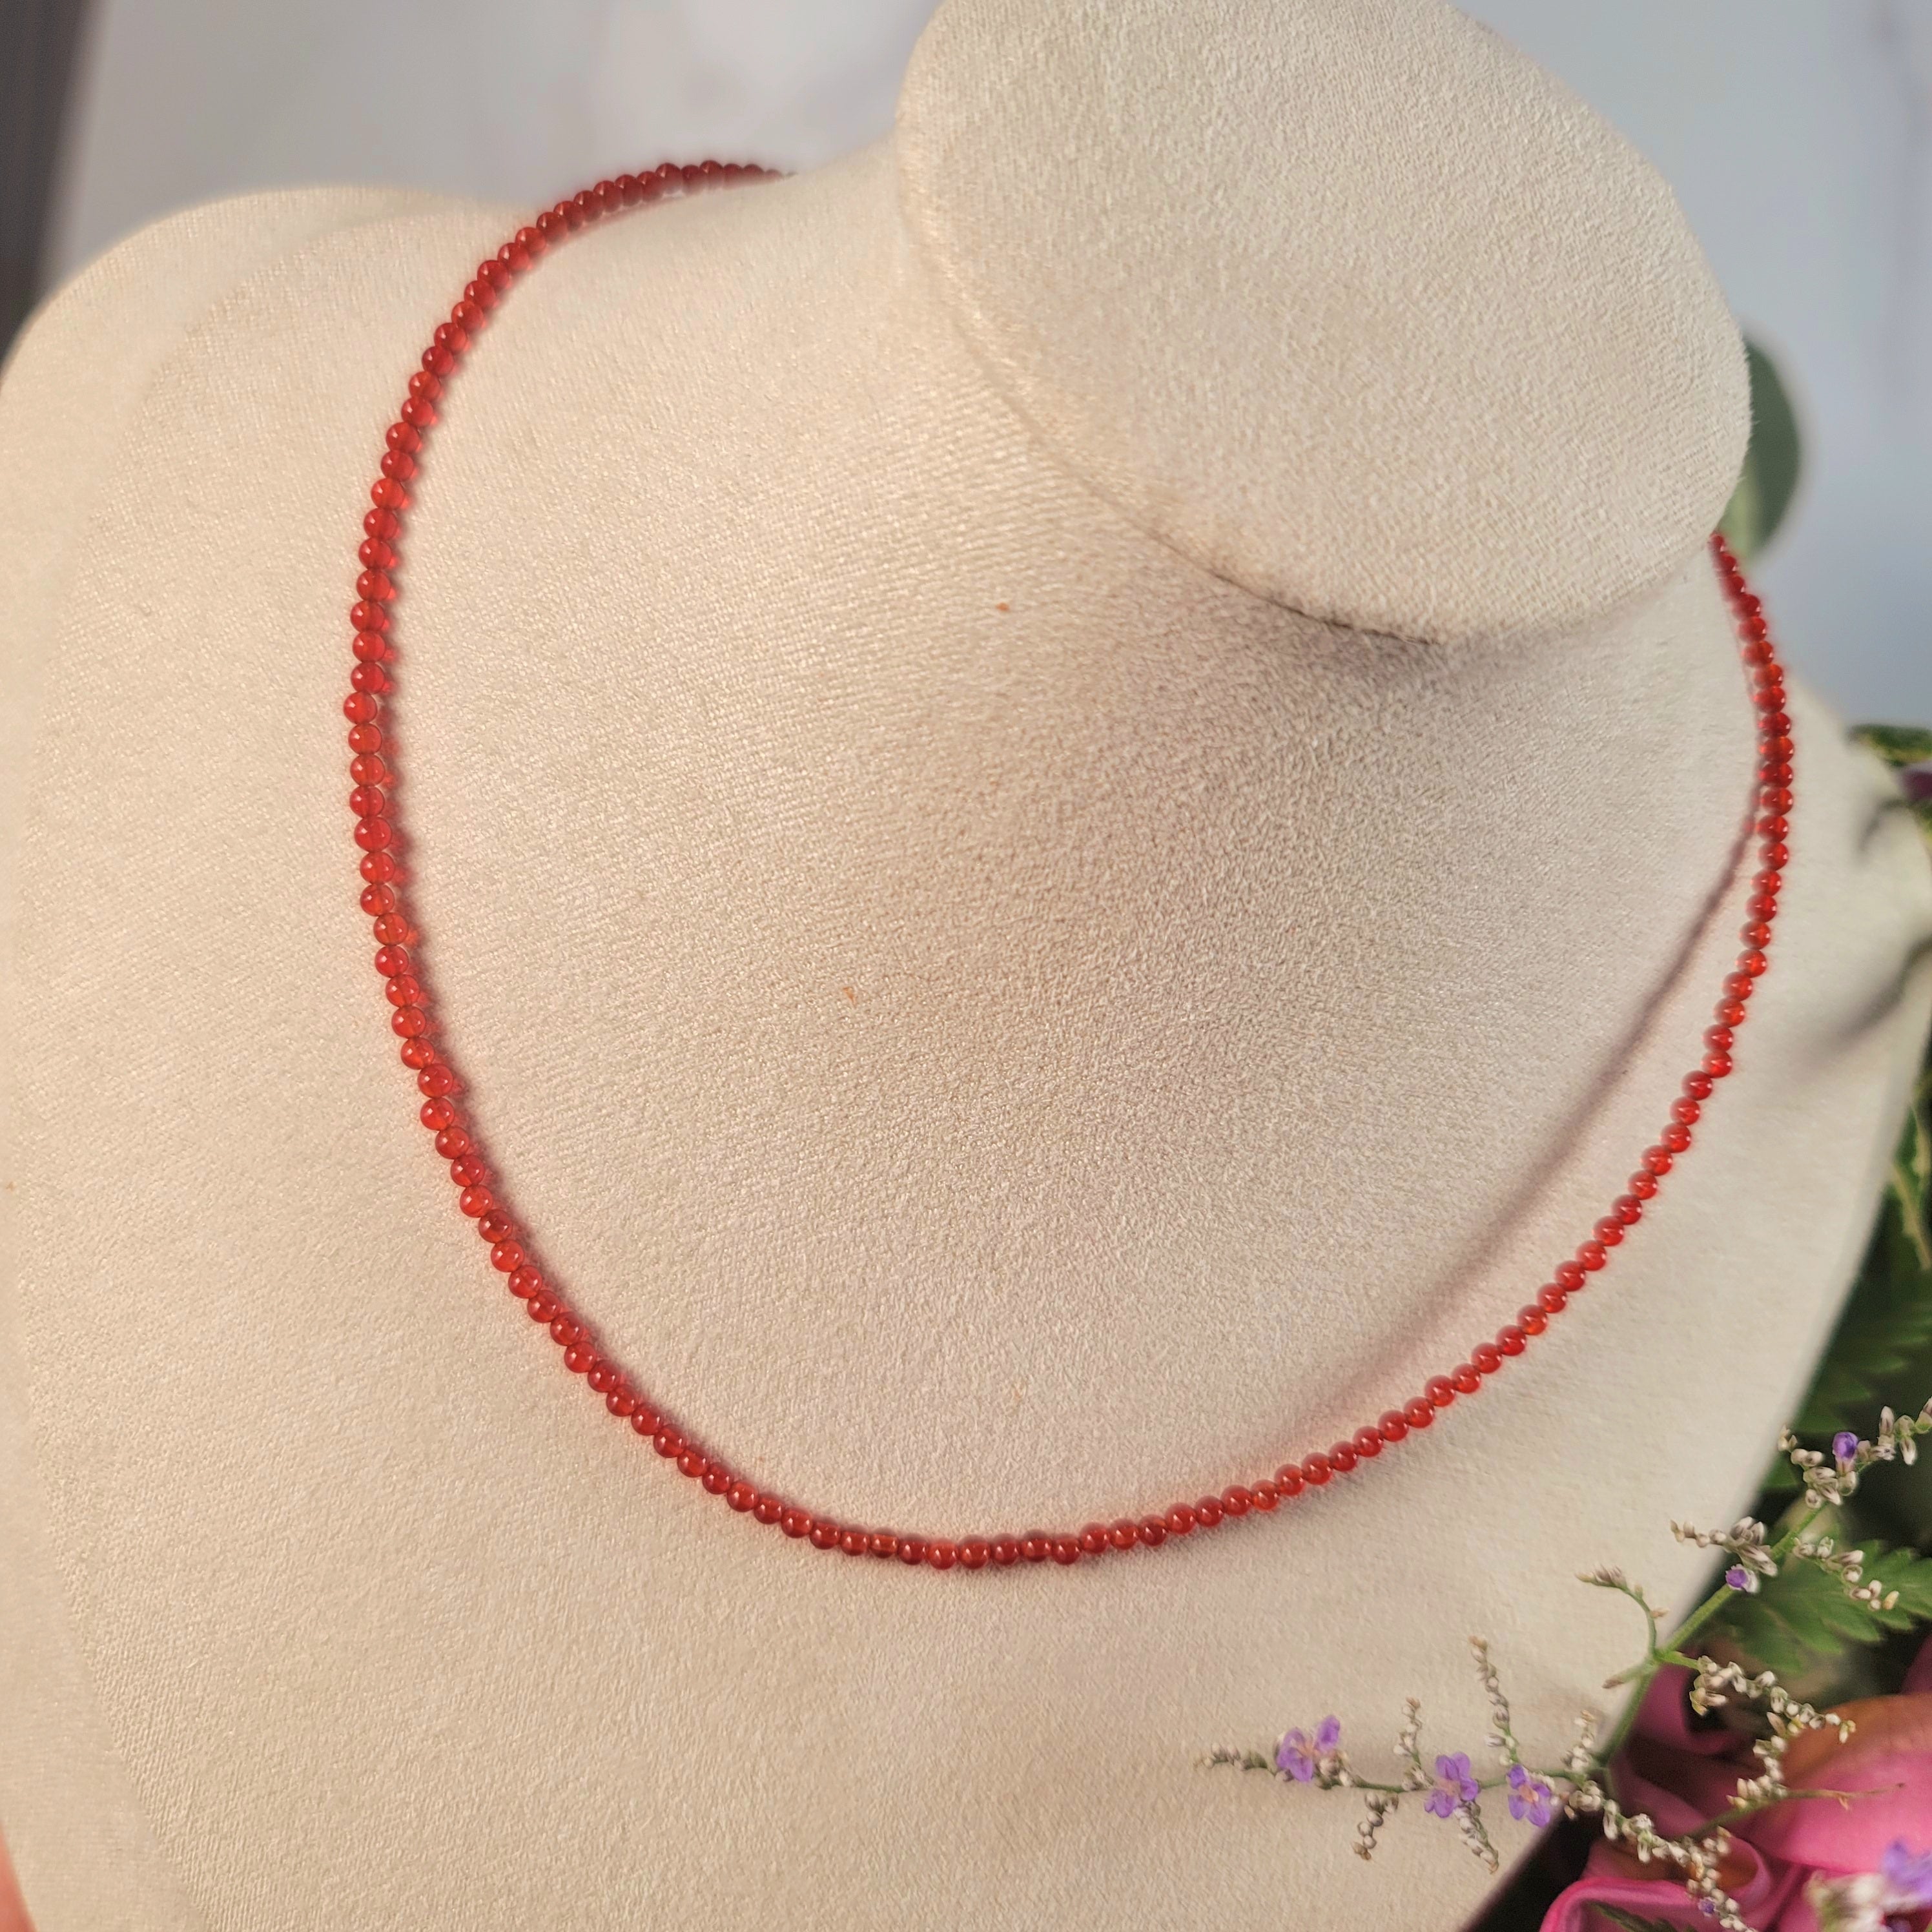 Fiery Carnelian Micro Round Choker/Layering Necklace for Creativity and Passion